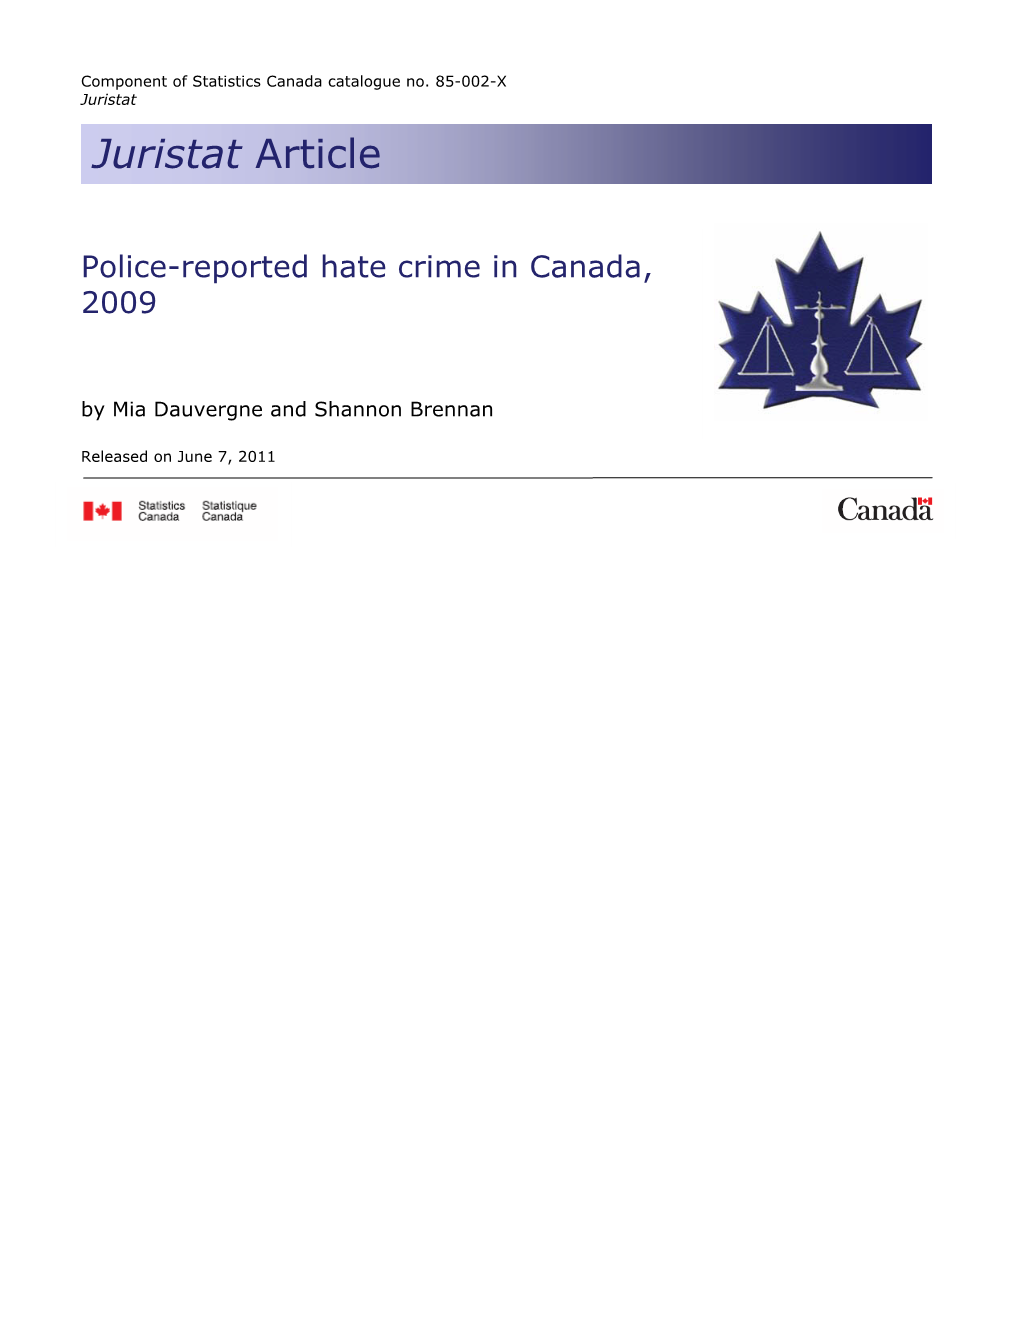 Police-Reported Hate Crime in Canada, 2009